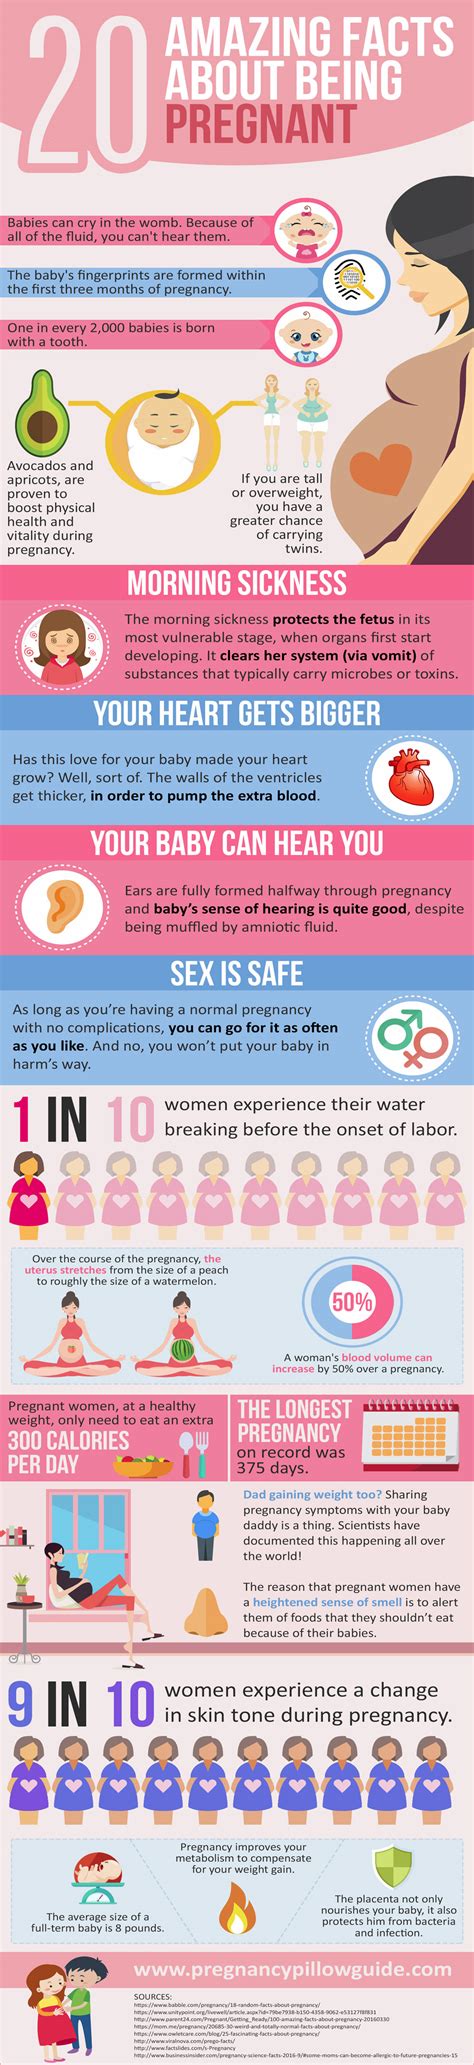 20 Amazing Facts About Being Pregnant [infographic]